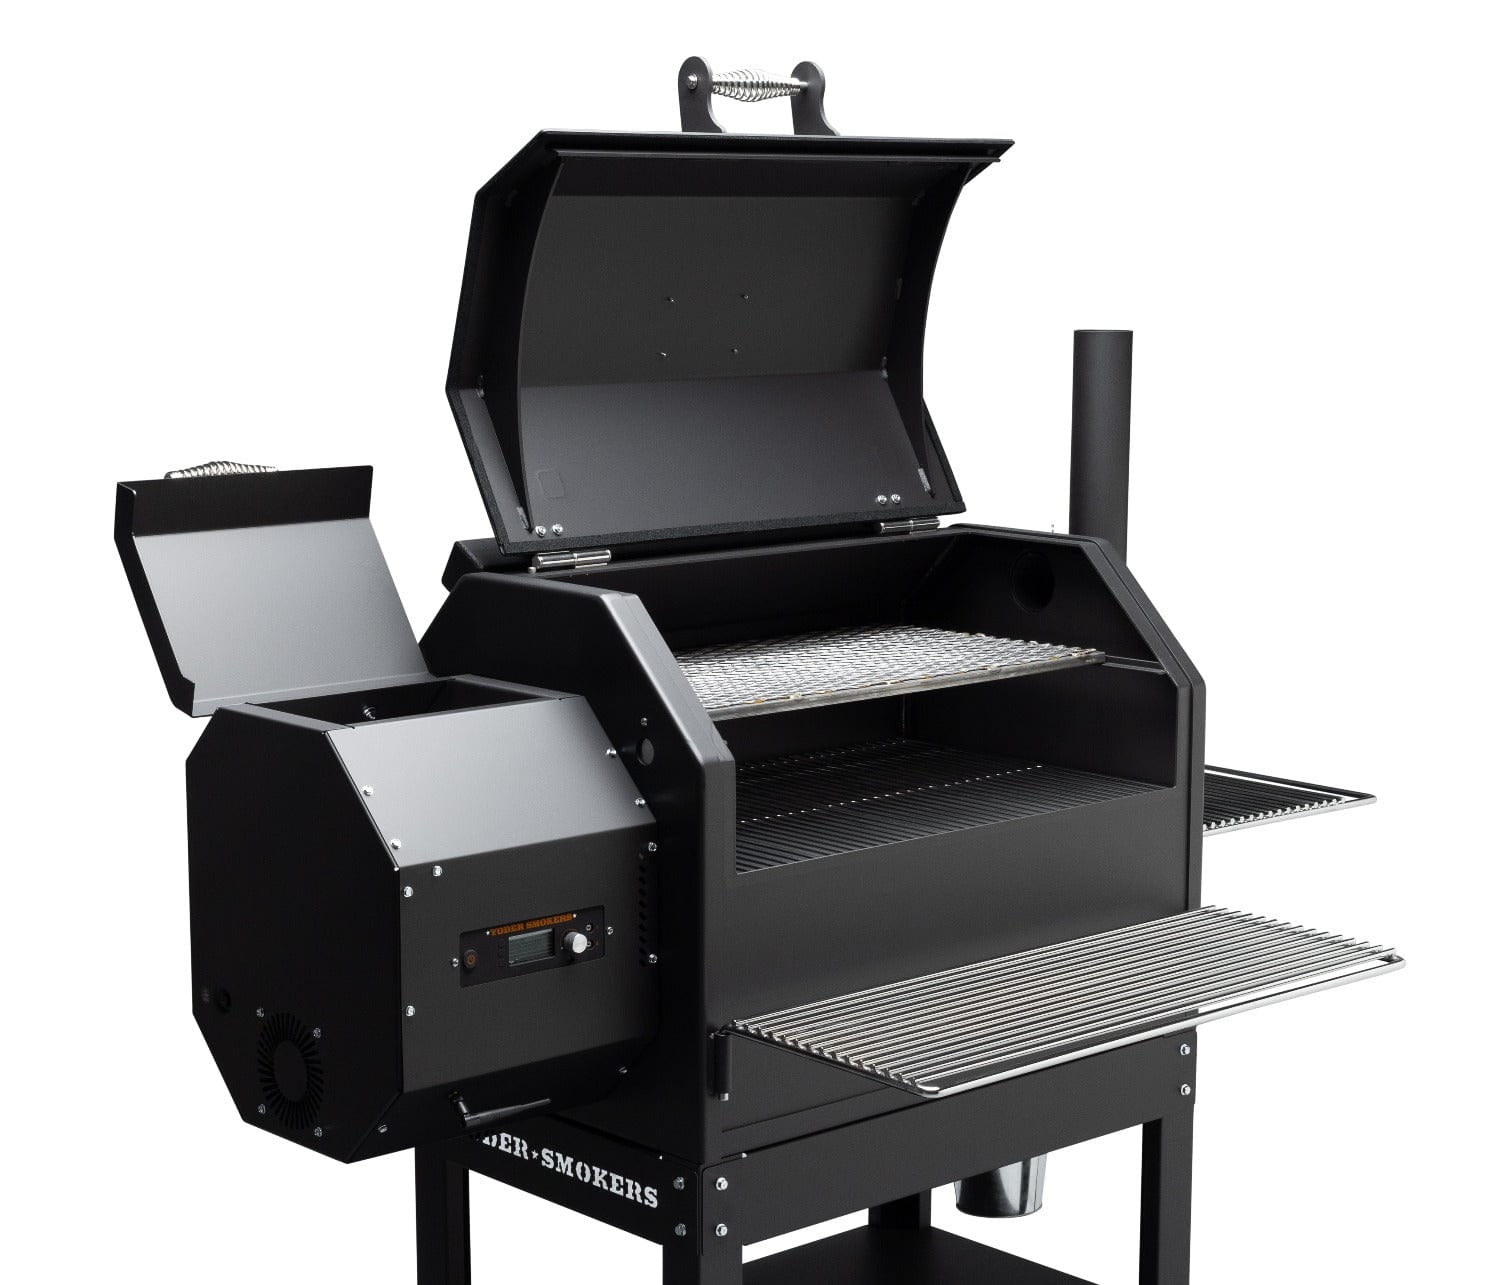 The YS640s Pellet Grill - Yoder Smokers